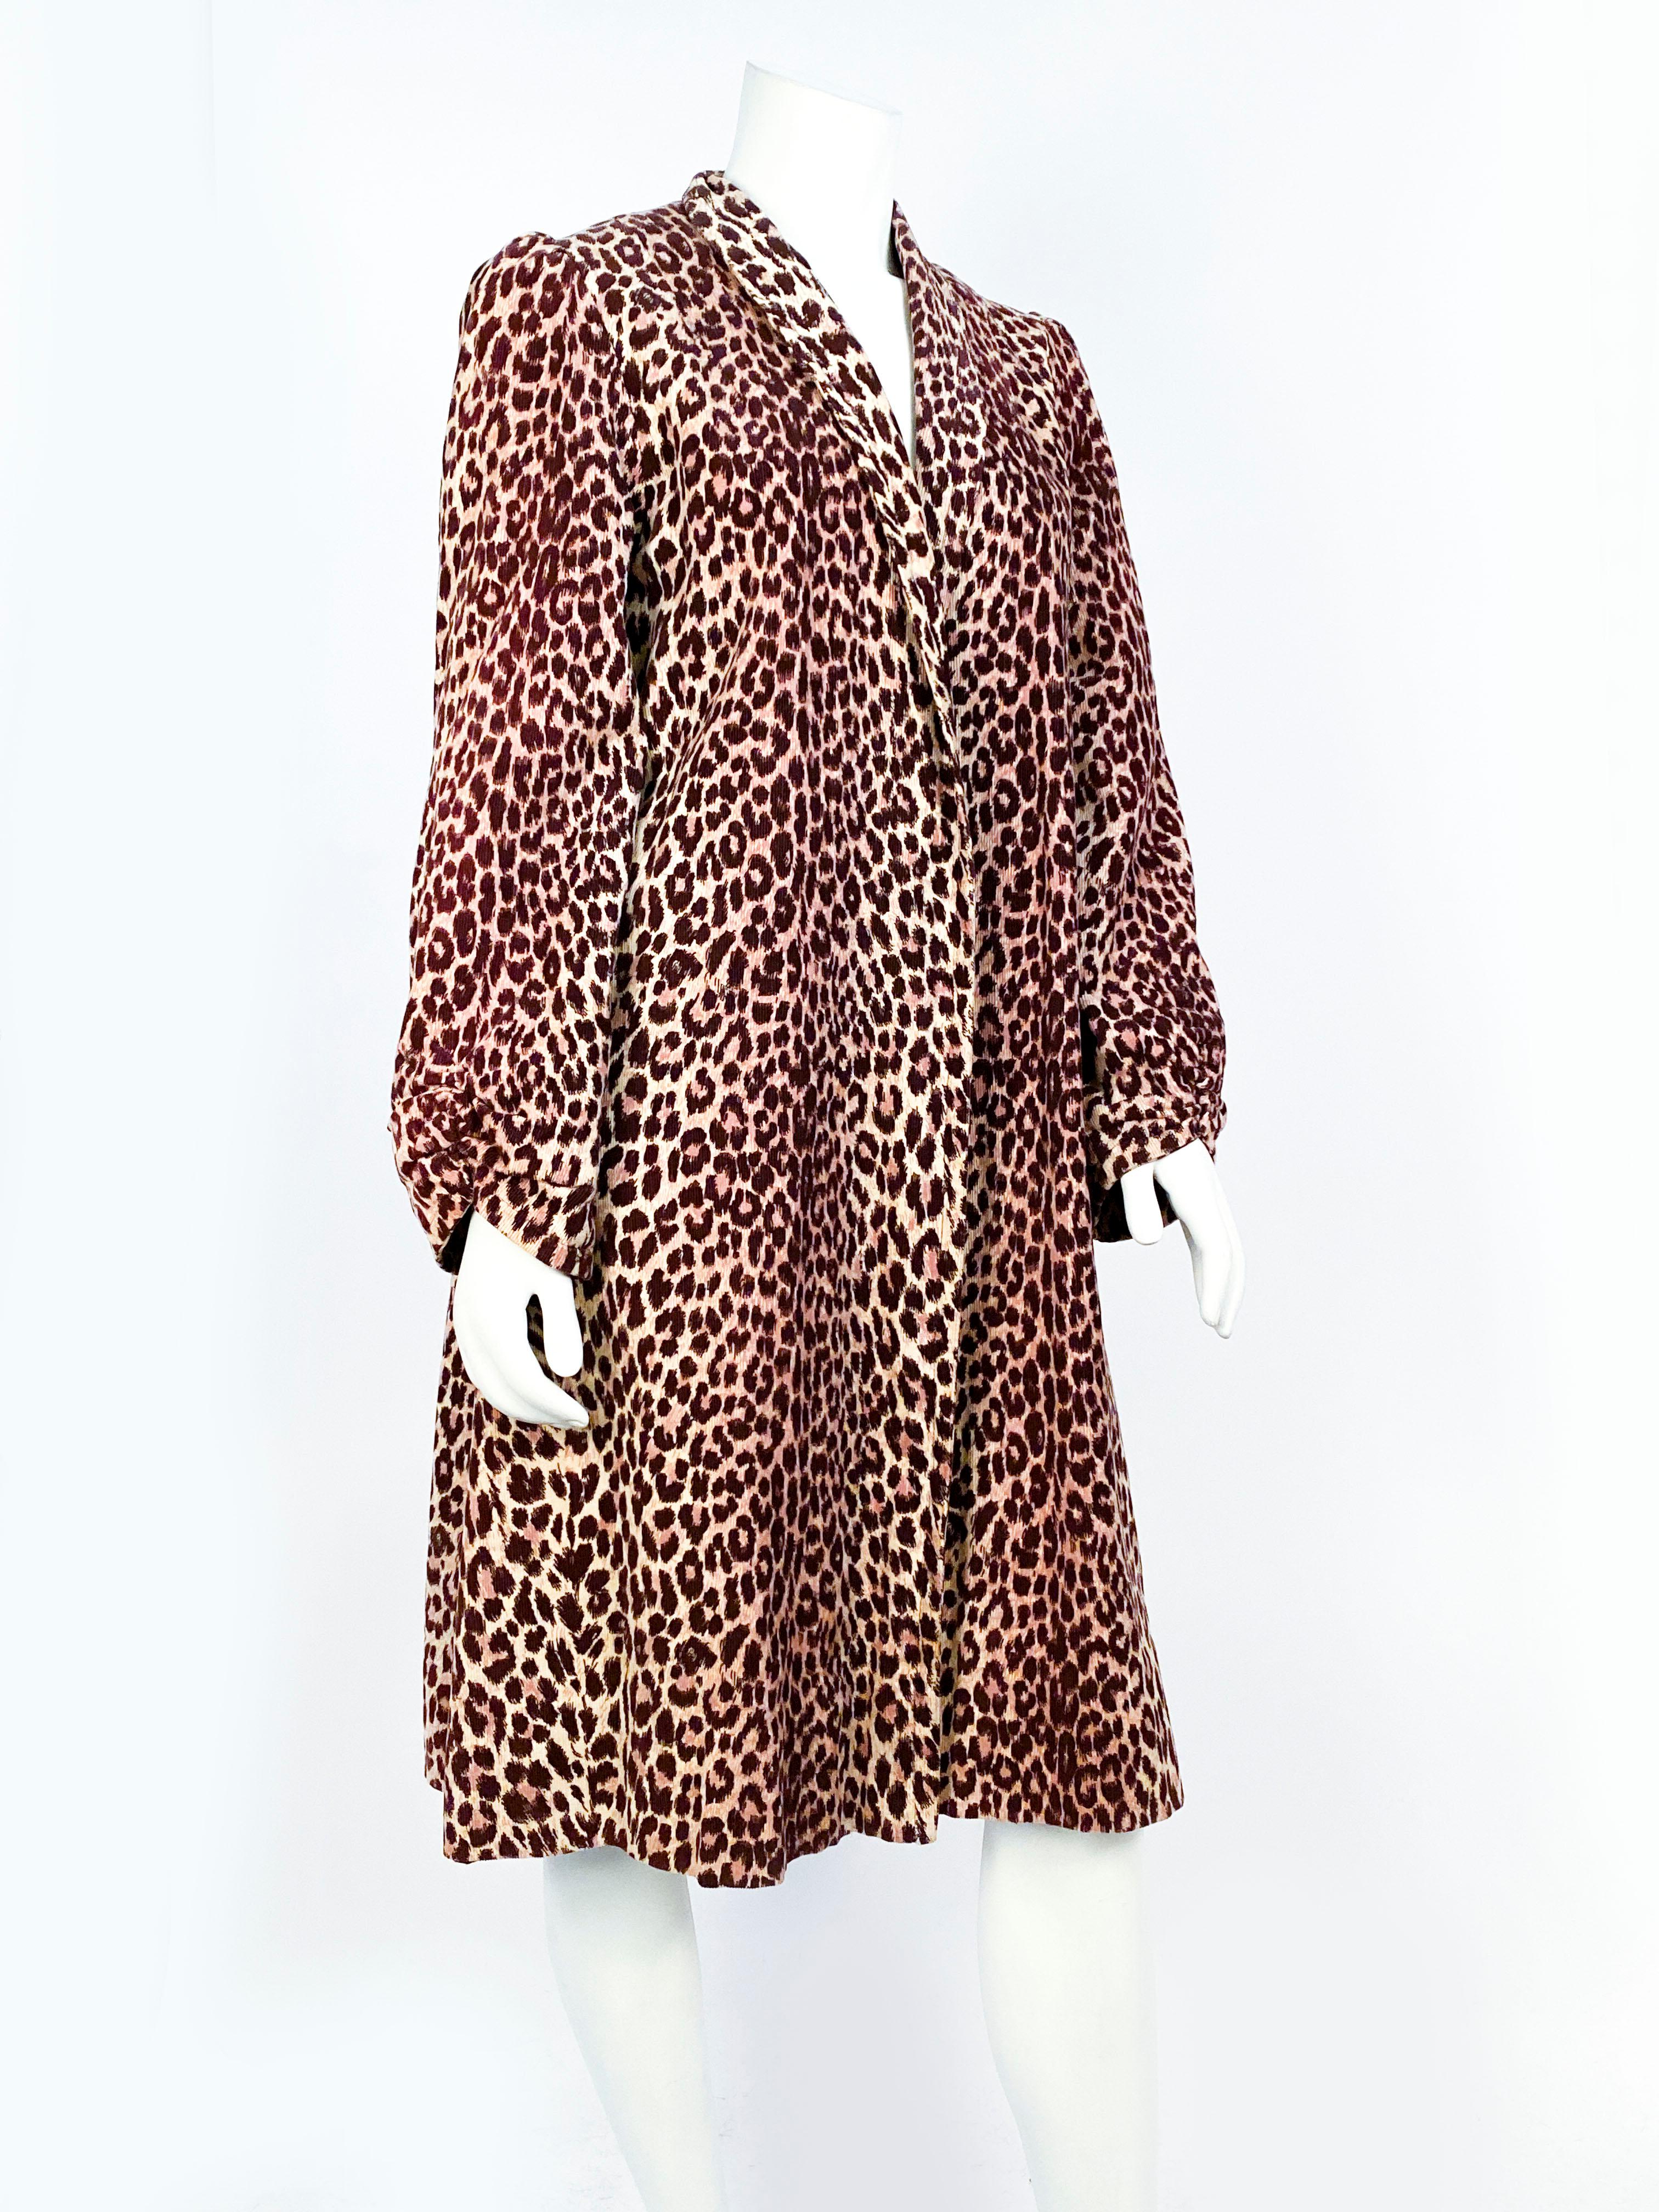 1940s coat Cheetah printed on corduroy with gathered shoulders, full sleeves, and ruched cuffs.